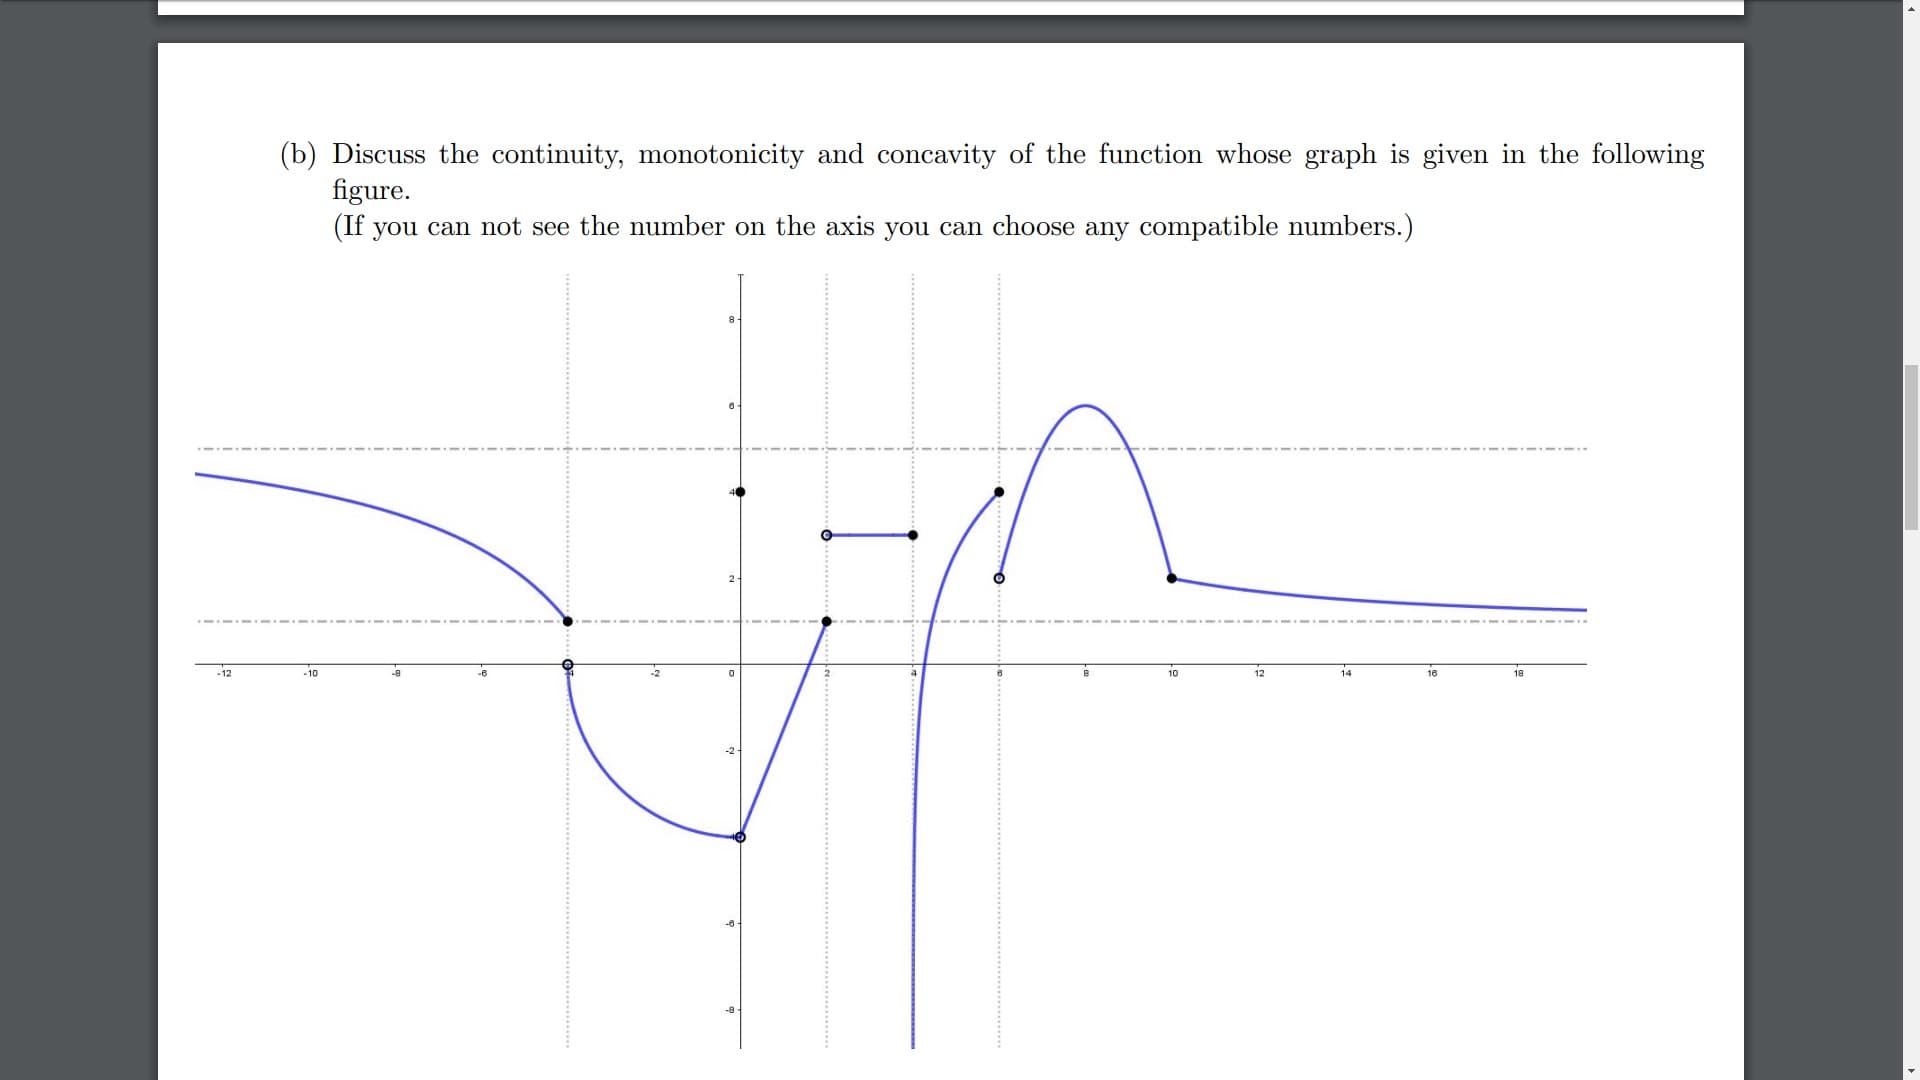 (b) Discuss the continuity, monotonicity and concavity of the function whose graph is given in the following
figure.
(If you can not see the number on the axis you can choose any compatible numbers.)
12
10
10
12
14
10
-2
